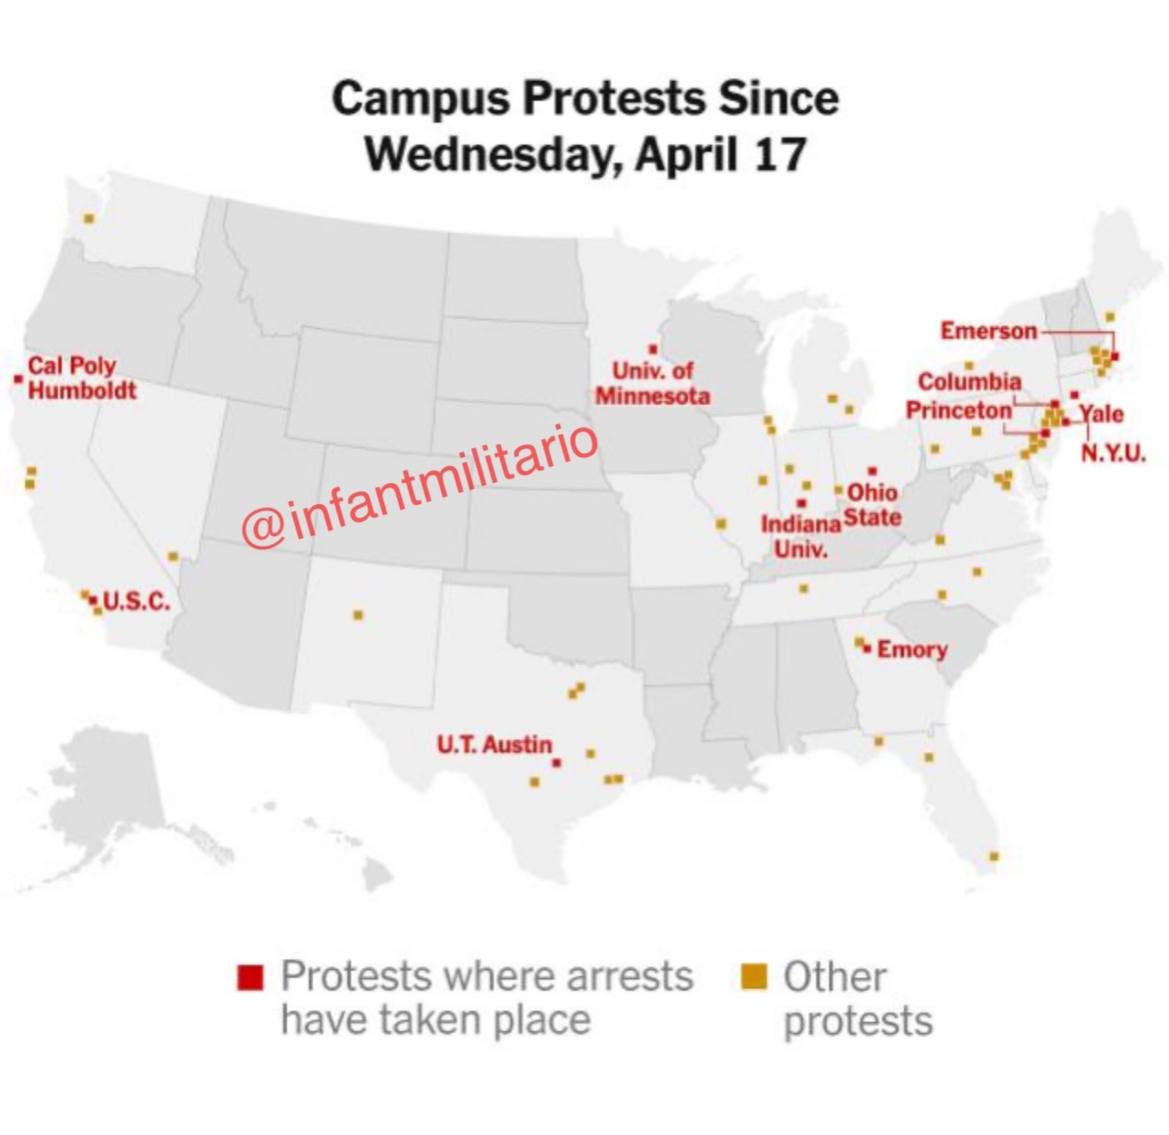 Pro-Palestinian protests in the US have expanded dramatically over the past nine days, with some universities